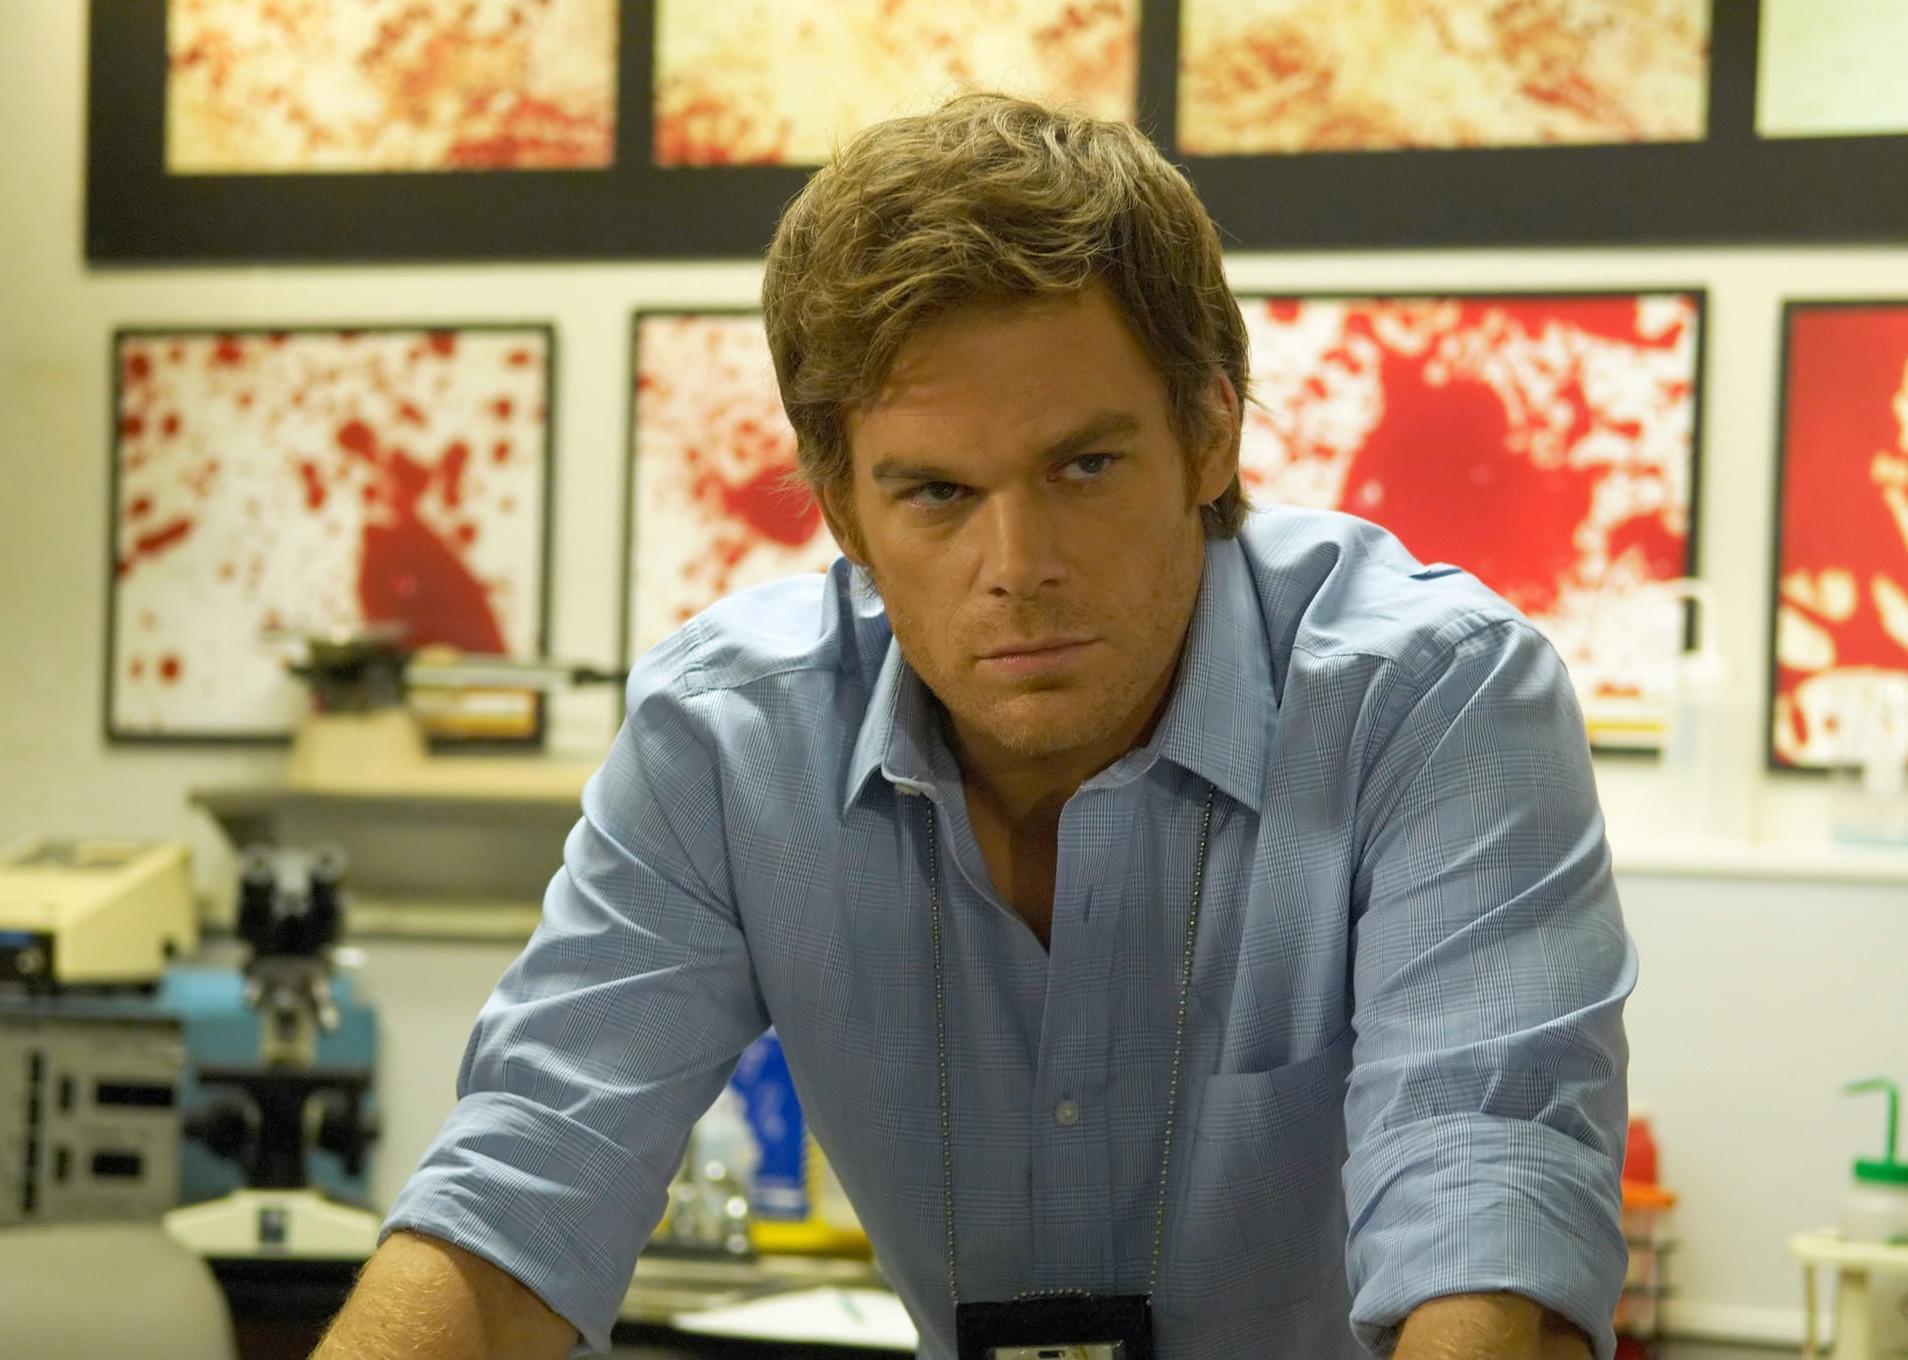 Michael C. Hall standing in an office in front of a wall of blood spatter prints.